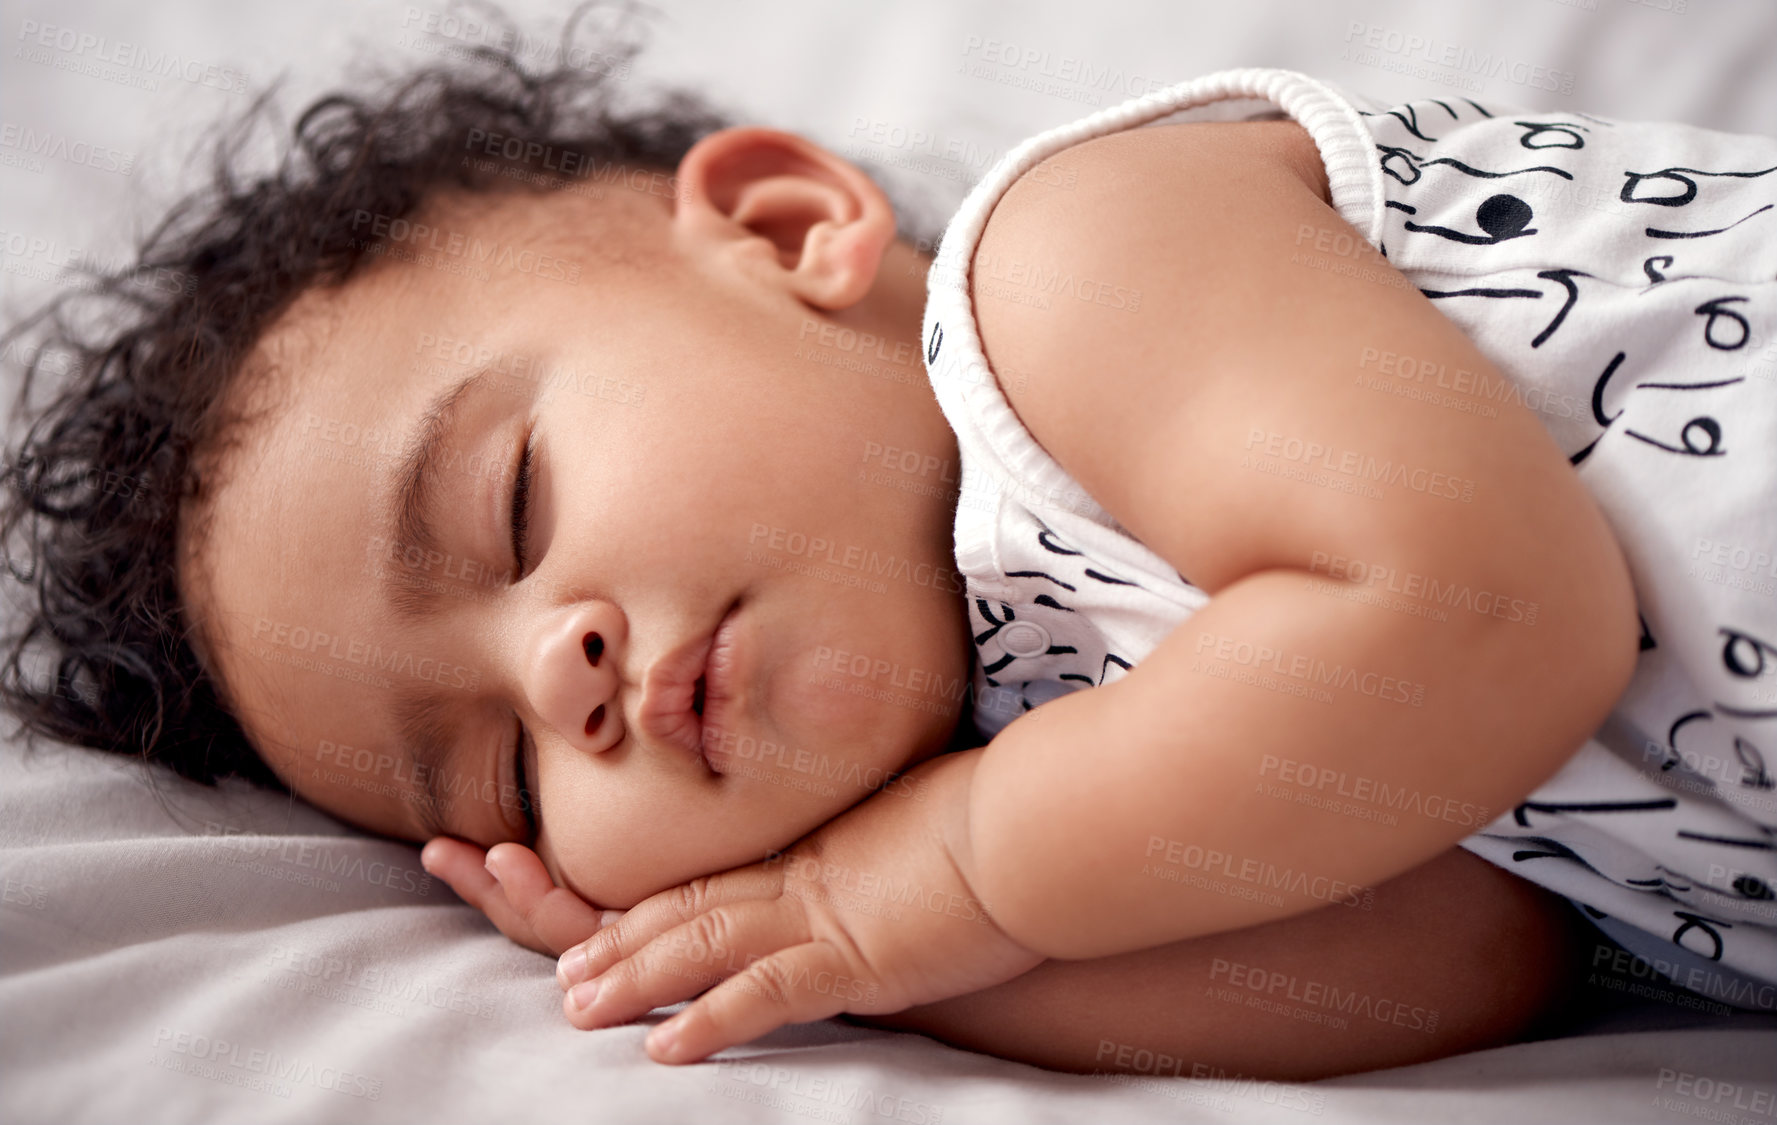 Buy stock photo Shot of an adorable baby boy sleeping peacefully on the bed at home